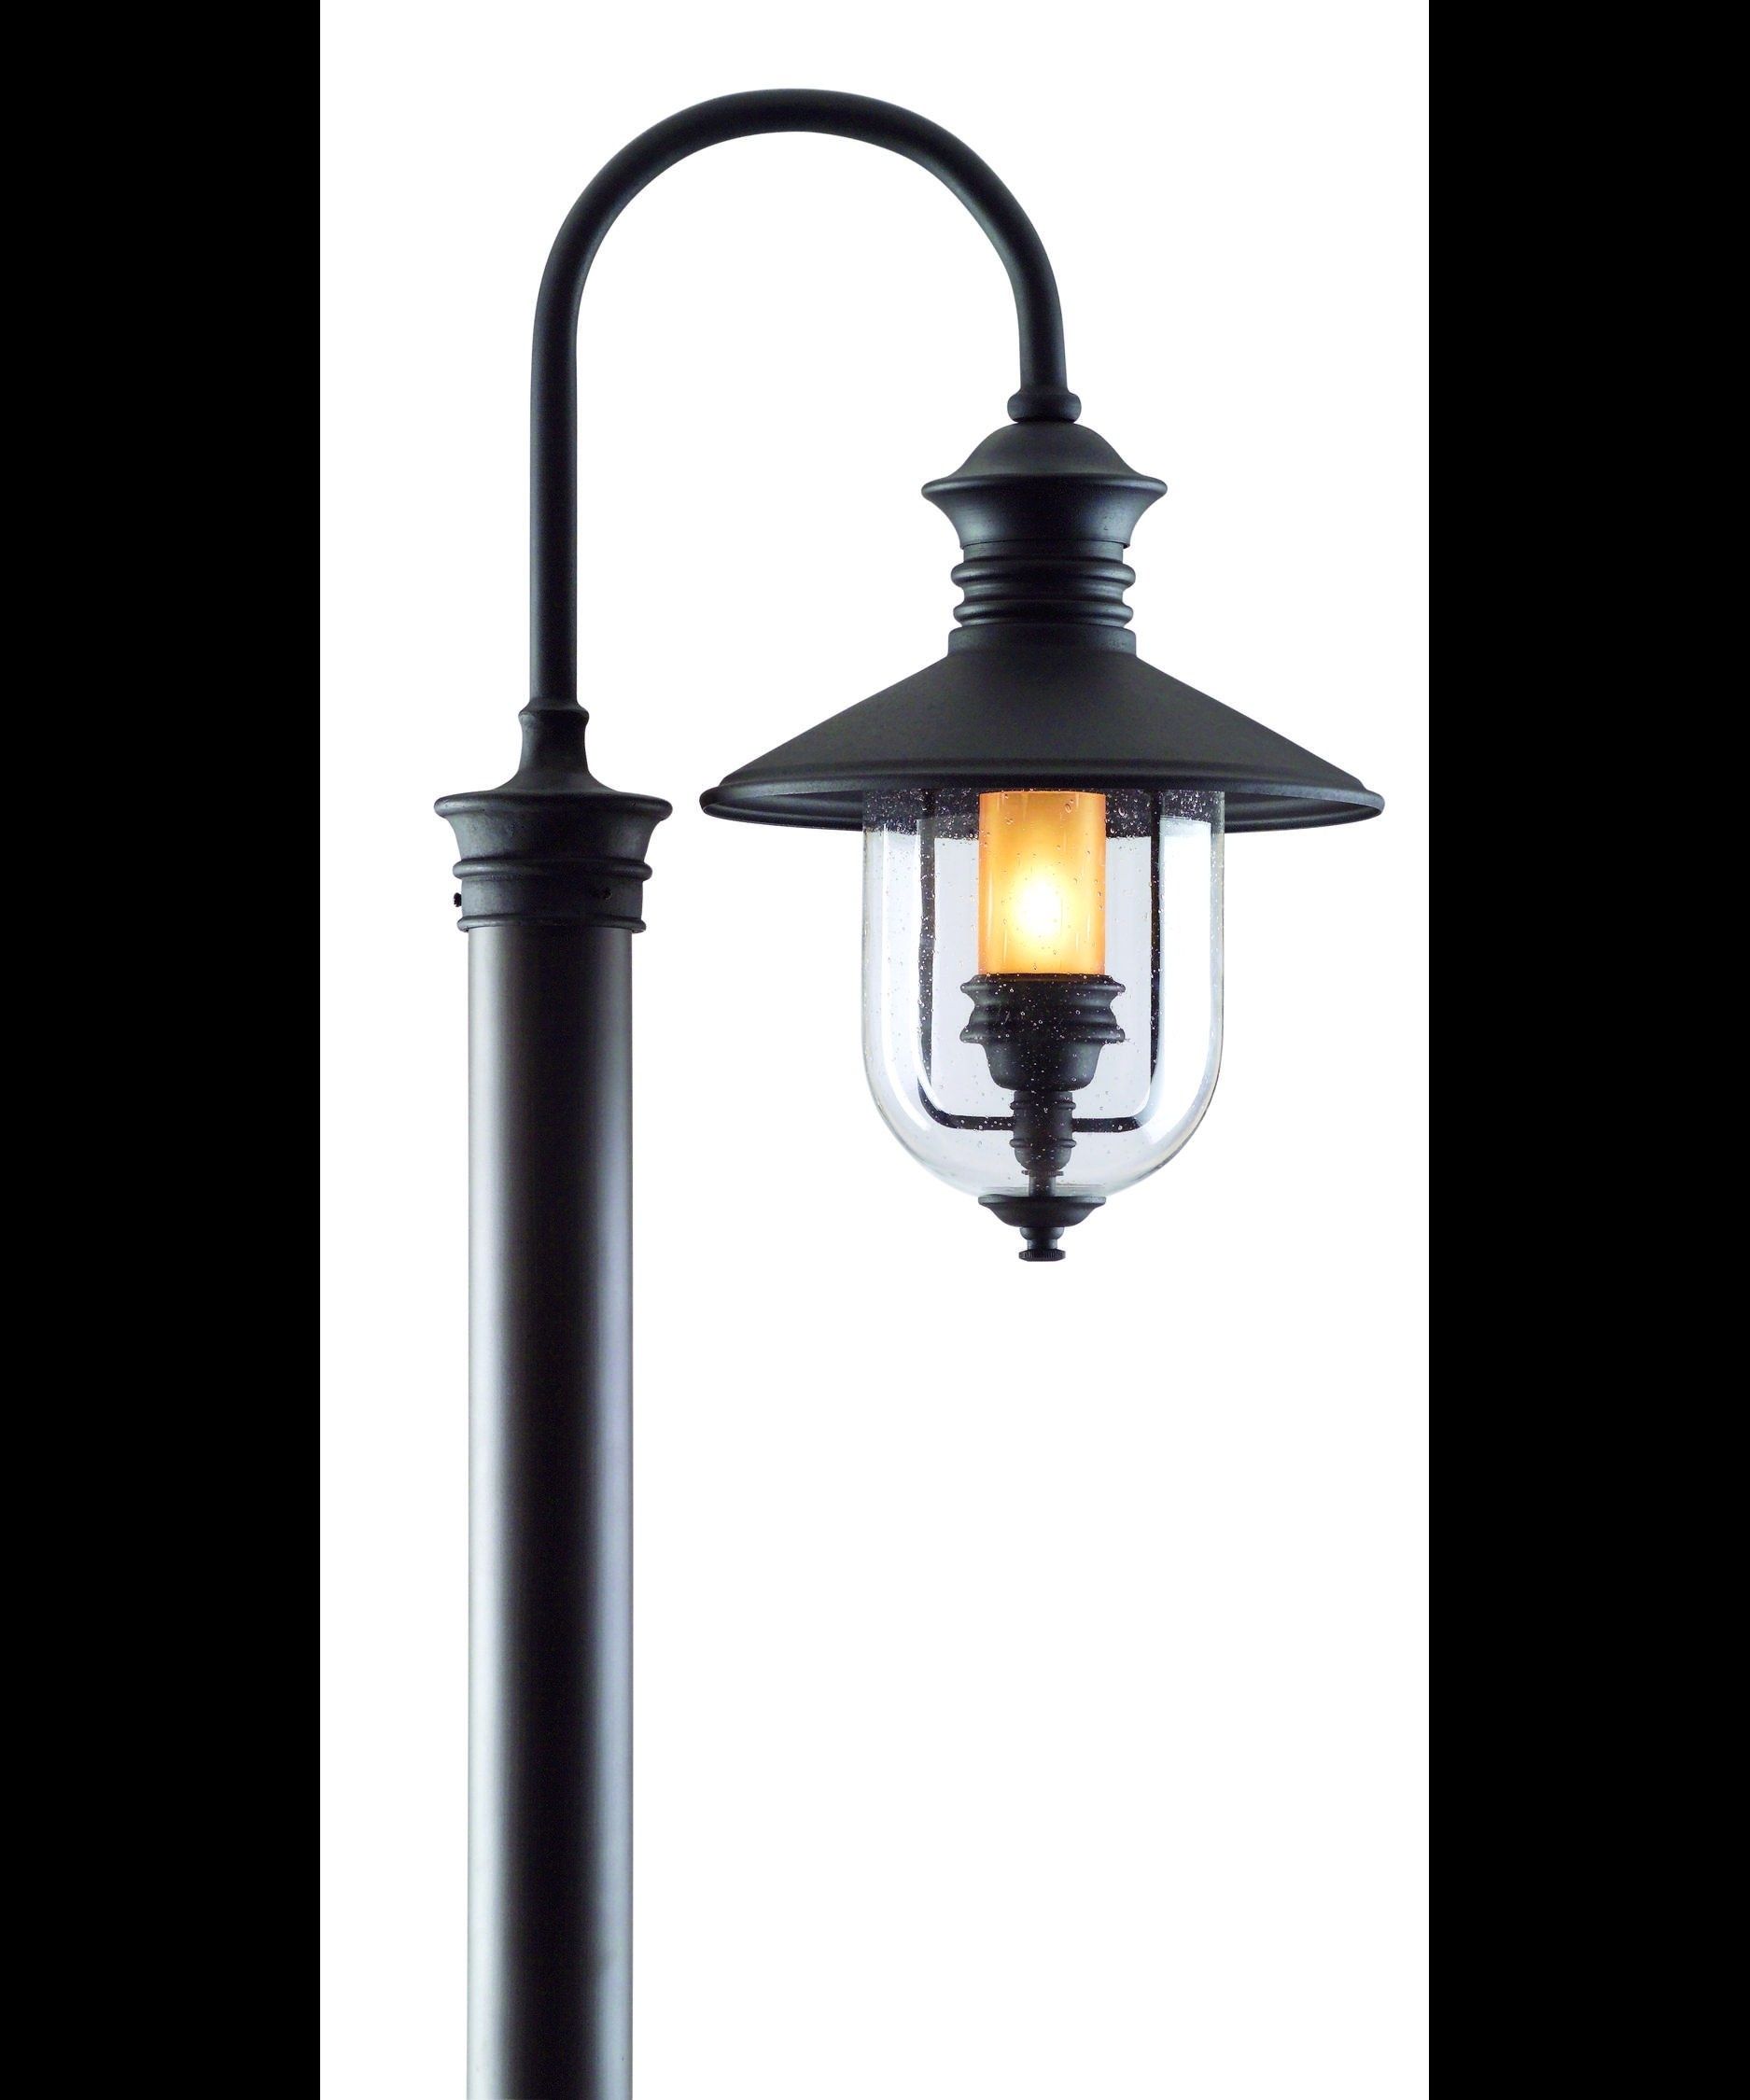 Contemporary Outdoor Lamp Post Lighting – Outdoor Designs Throughout Contemporary Outdoor Post Lighting (View 7 of 15)